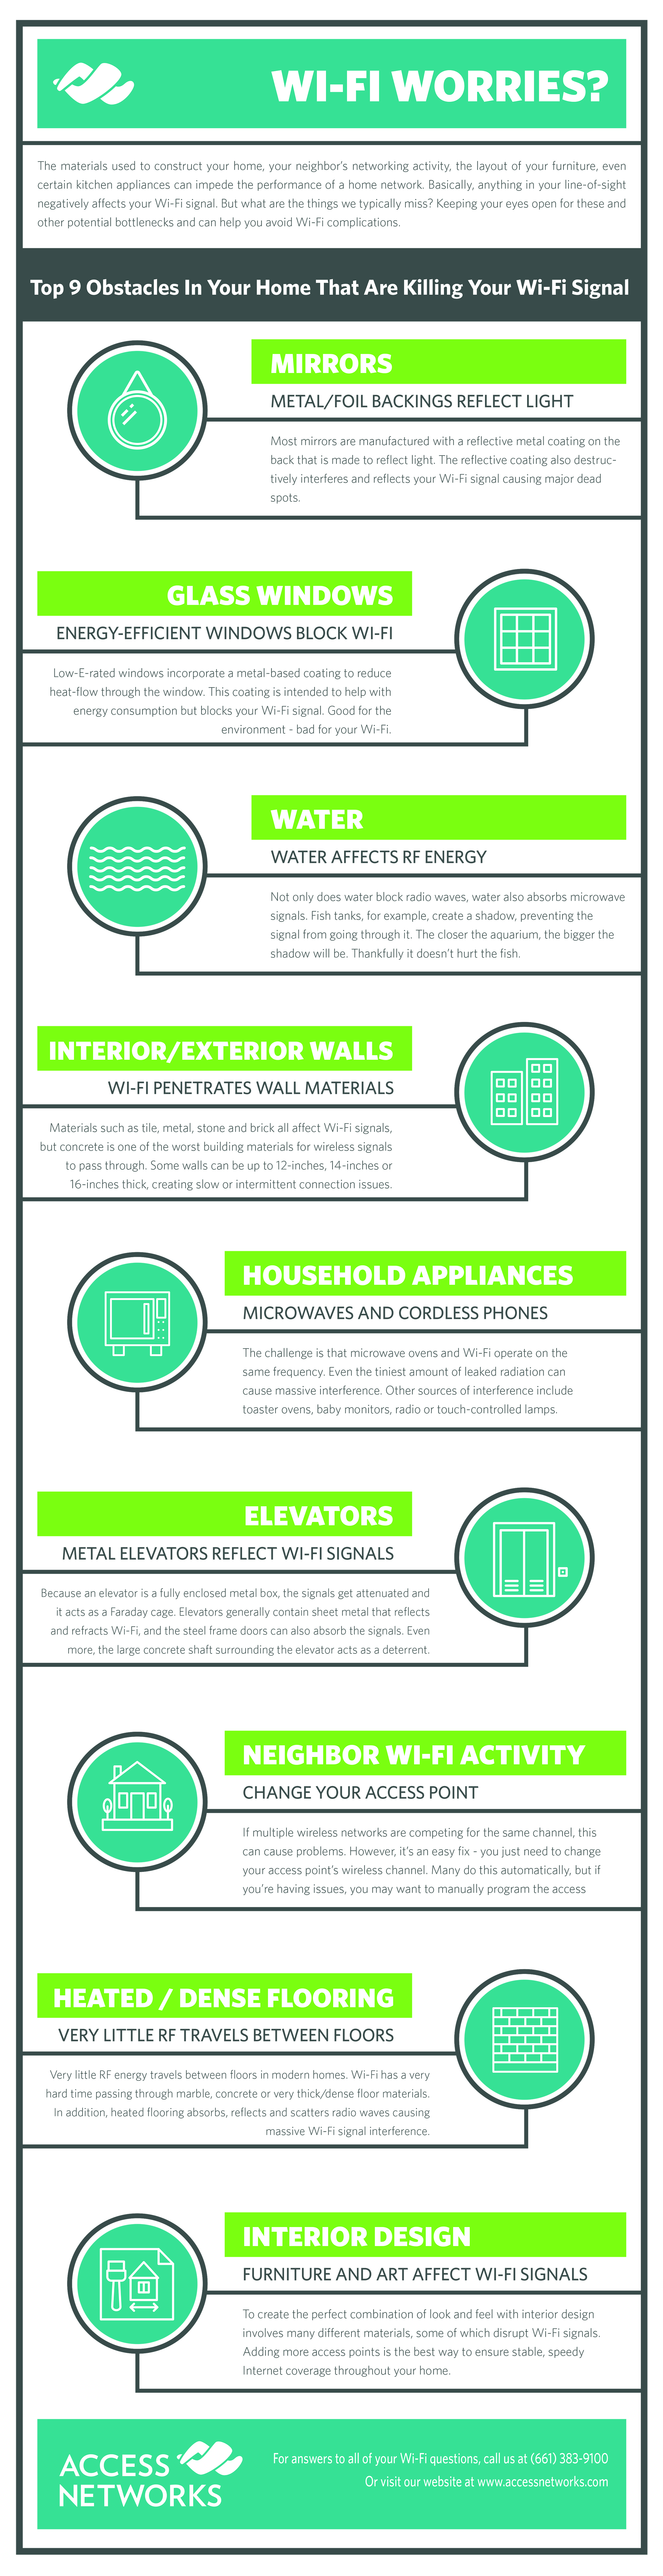 Access-Networks Infographic 9 Wi-Fi Obstacles